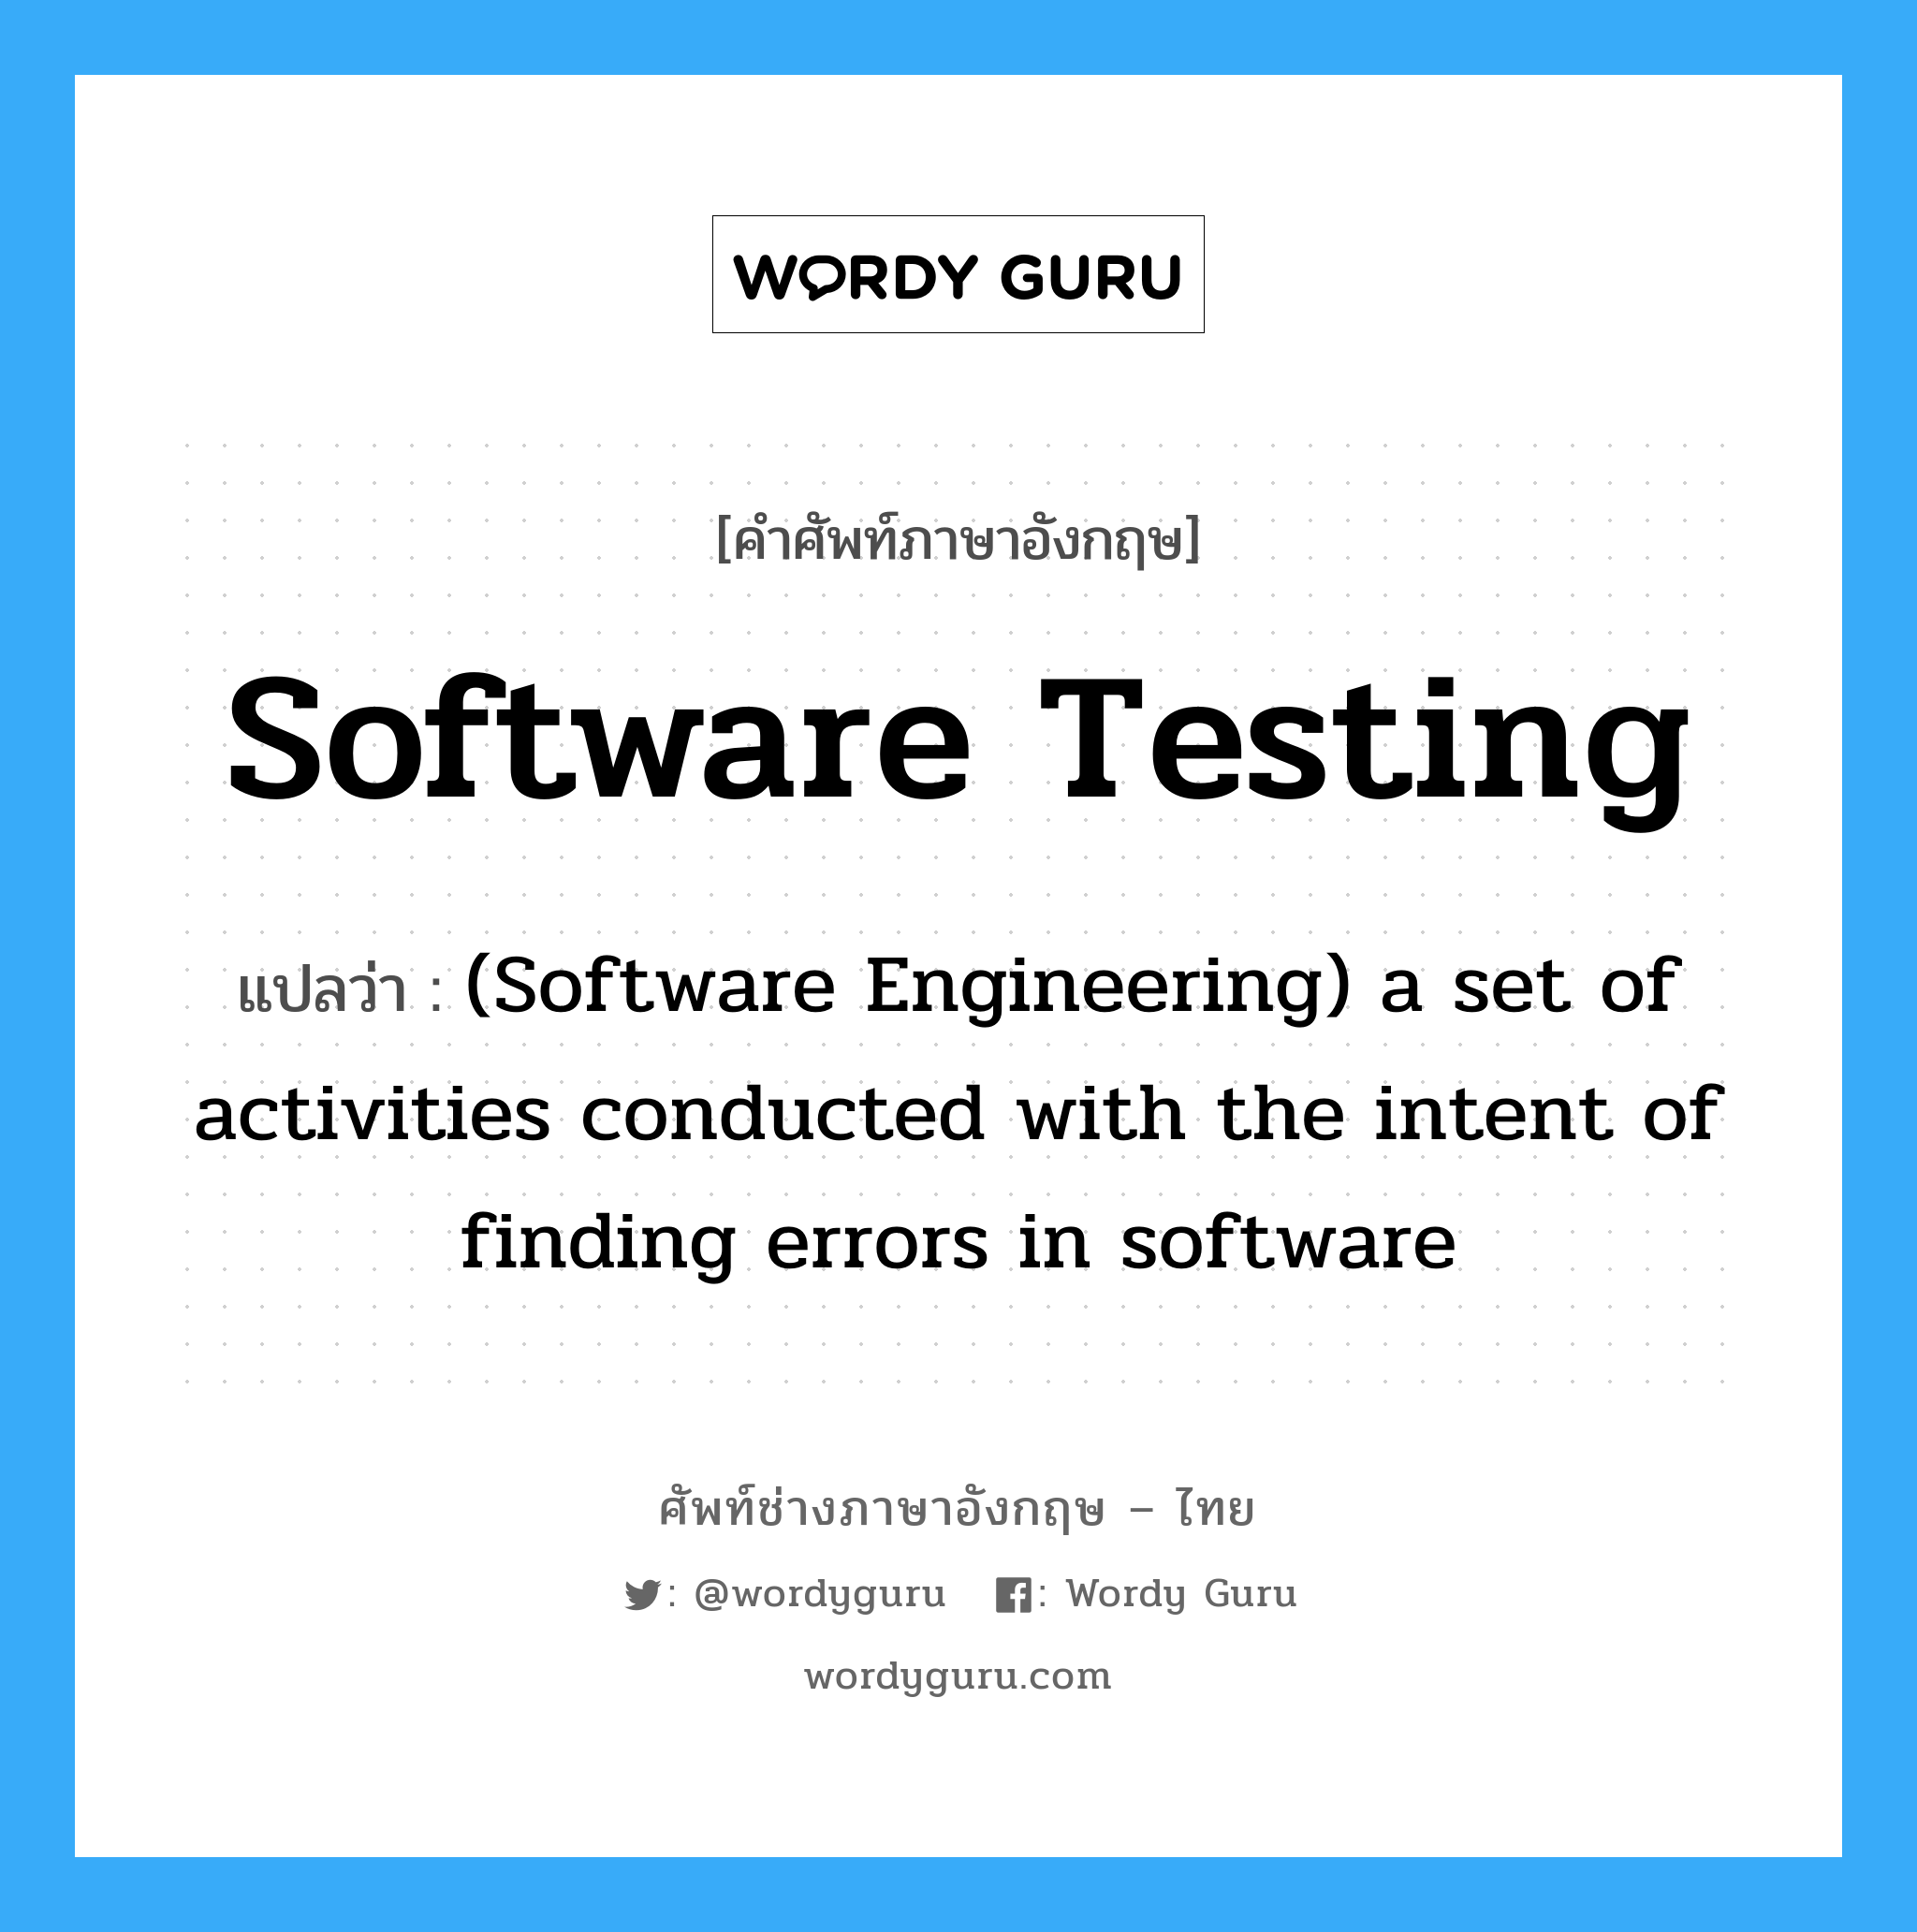 Software testing แปลว่า?, คำศัพท์ช่างภาษาอังกฤษ - ไทย Software testing คำศัพท์ภาษาอังกฤษ Software testing แปลว่า (Software Engineering) a set of activities conducted with the intent of finding errors in software